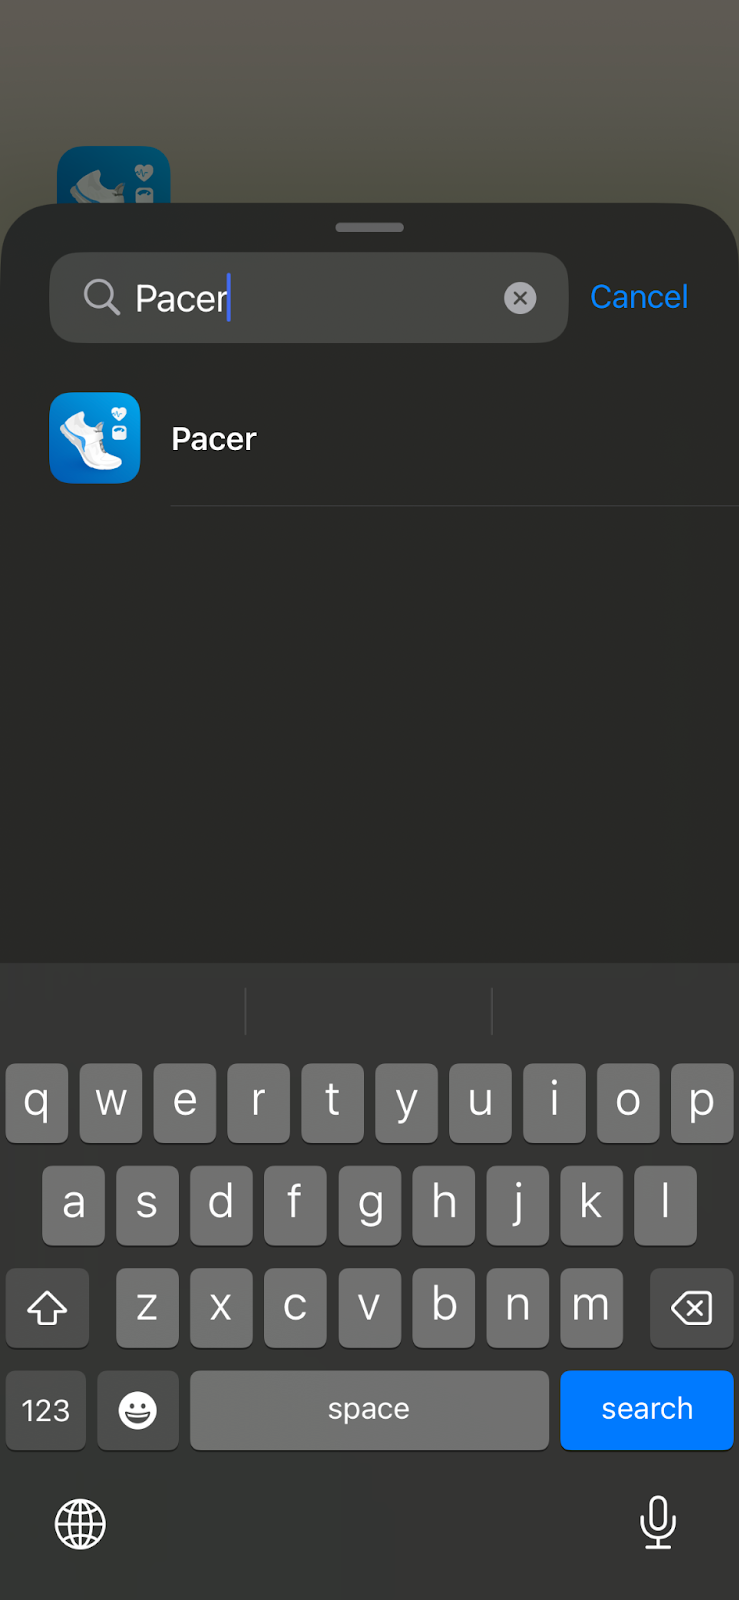 Search for "Pacer"